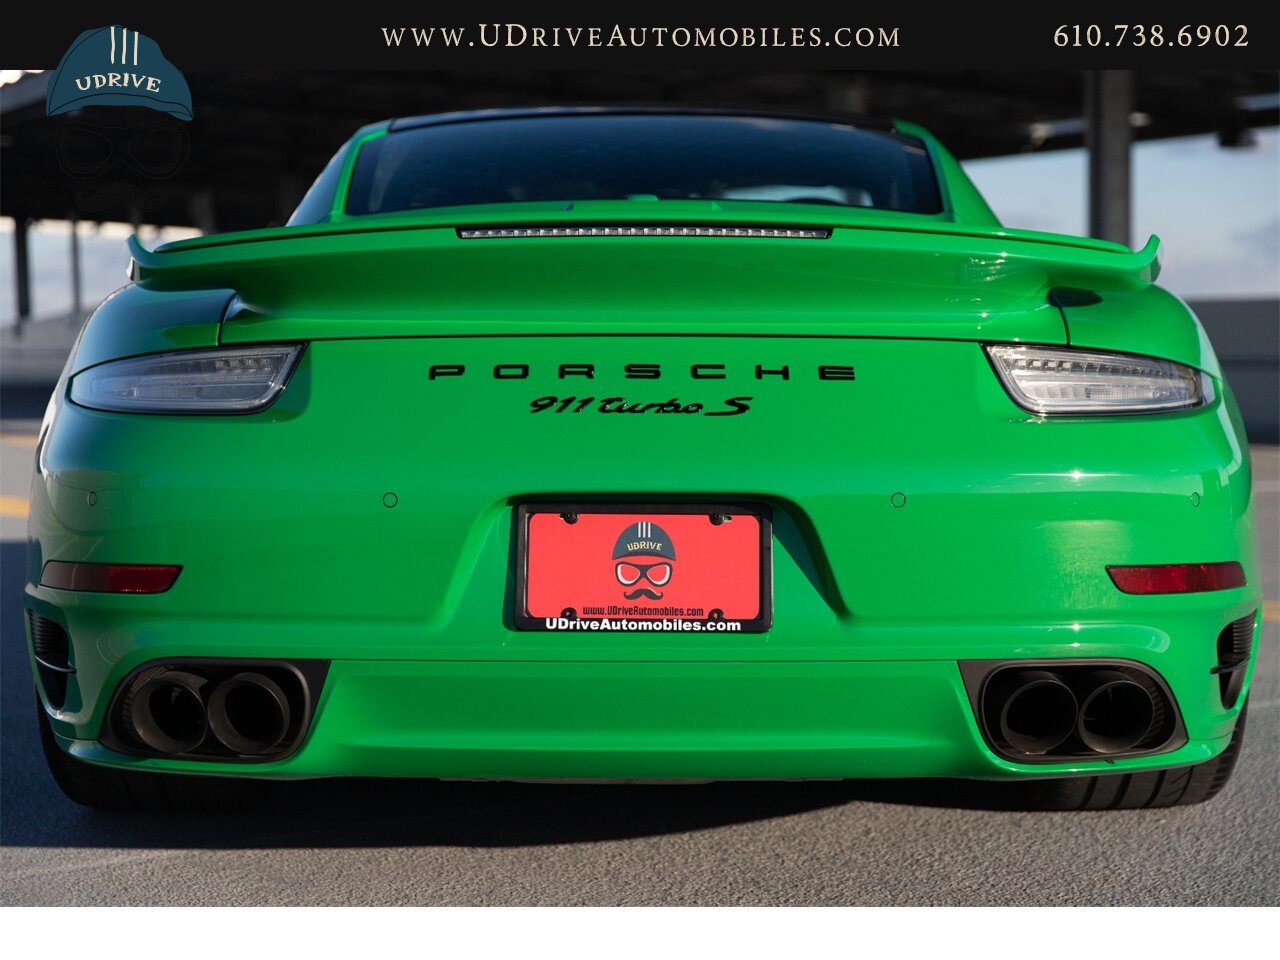 2016 Porsche 911 Turbo S PTS Viper Green Aerokit $203k MSRP  Painted Side Skirts Painted Grilles Wheels in Black - Photo 22 - West Chester, PA 19382